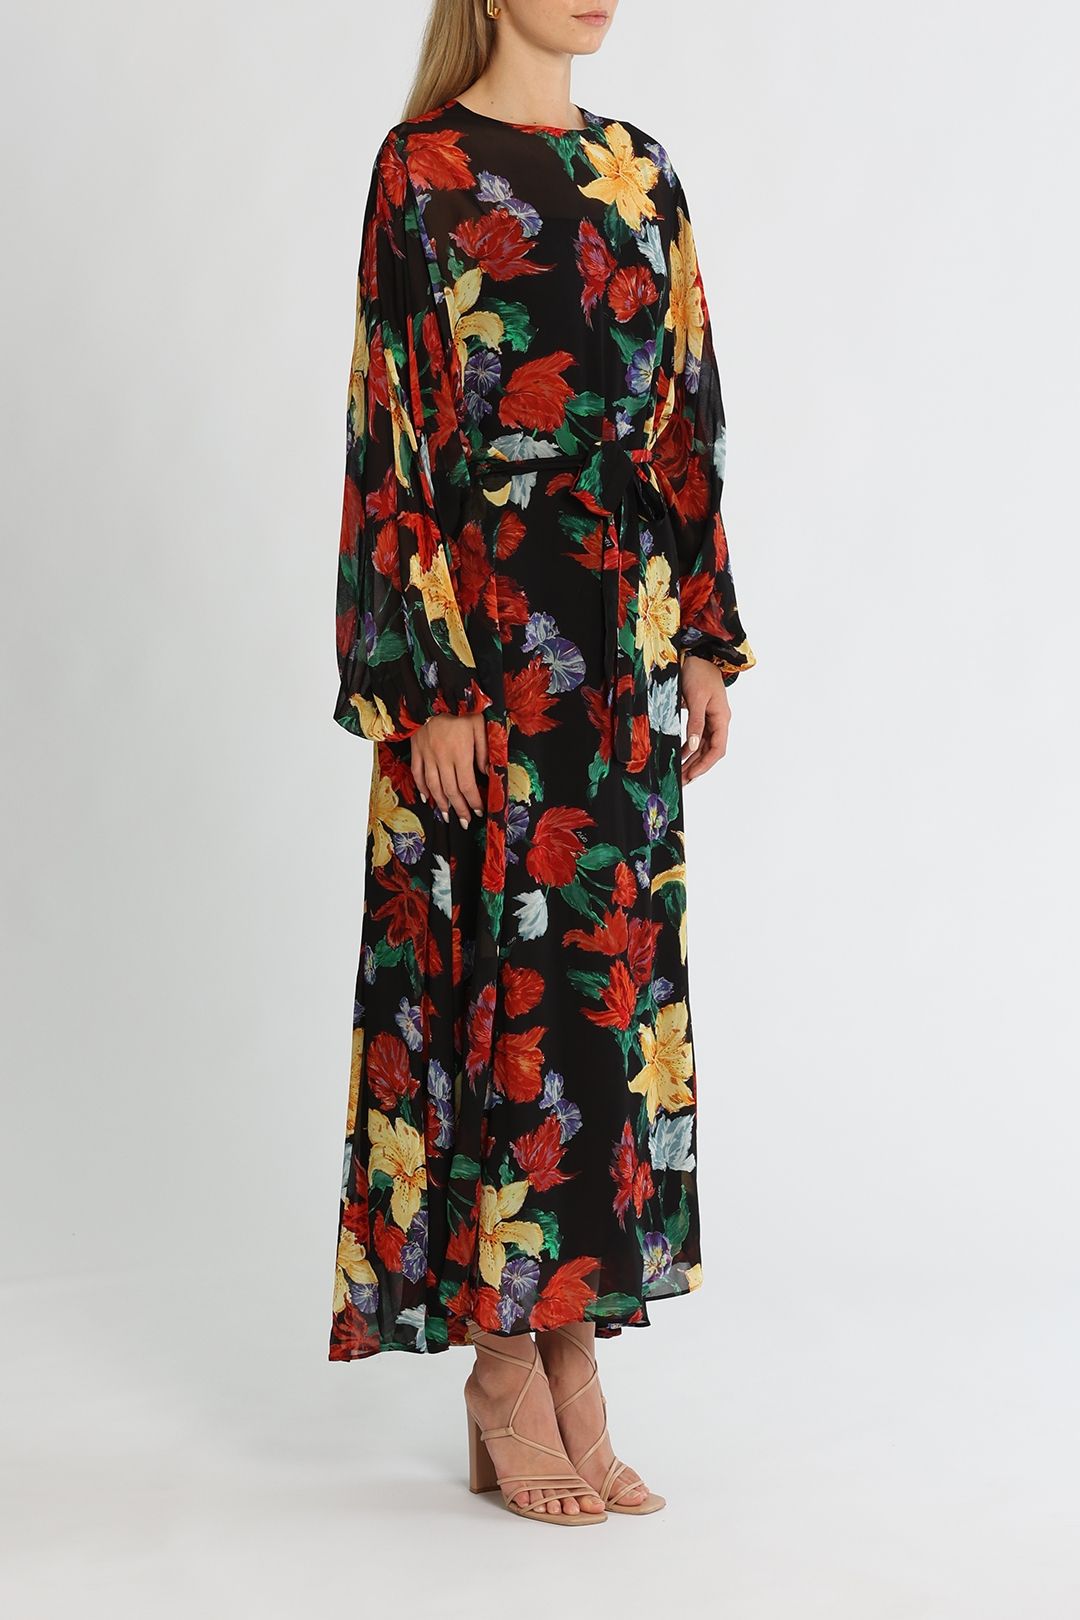 Rixo London Pia Lily Garden Belted Tent Dress Maxi